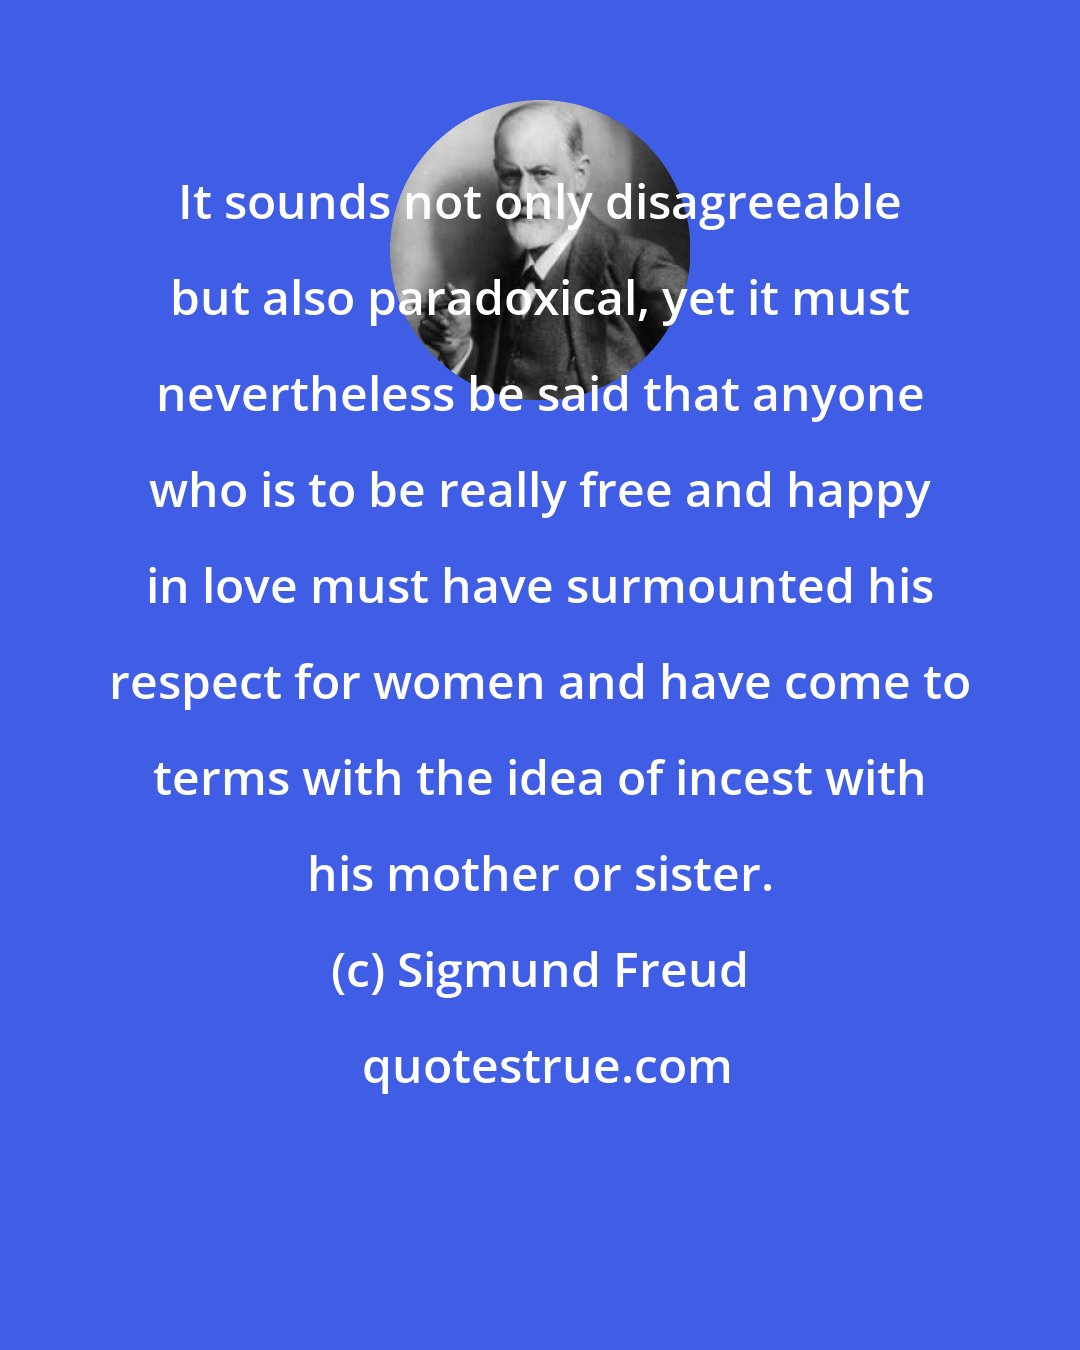 Sigmund Freud: It sounds not only disagreeable but also paradoxical, yet it must nevertheless be said that anyone who is to be really free and happy in love must have surmounted his respect for women and have come to terms with the idea of incest with his mother or sister.